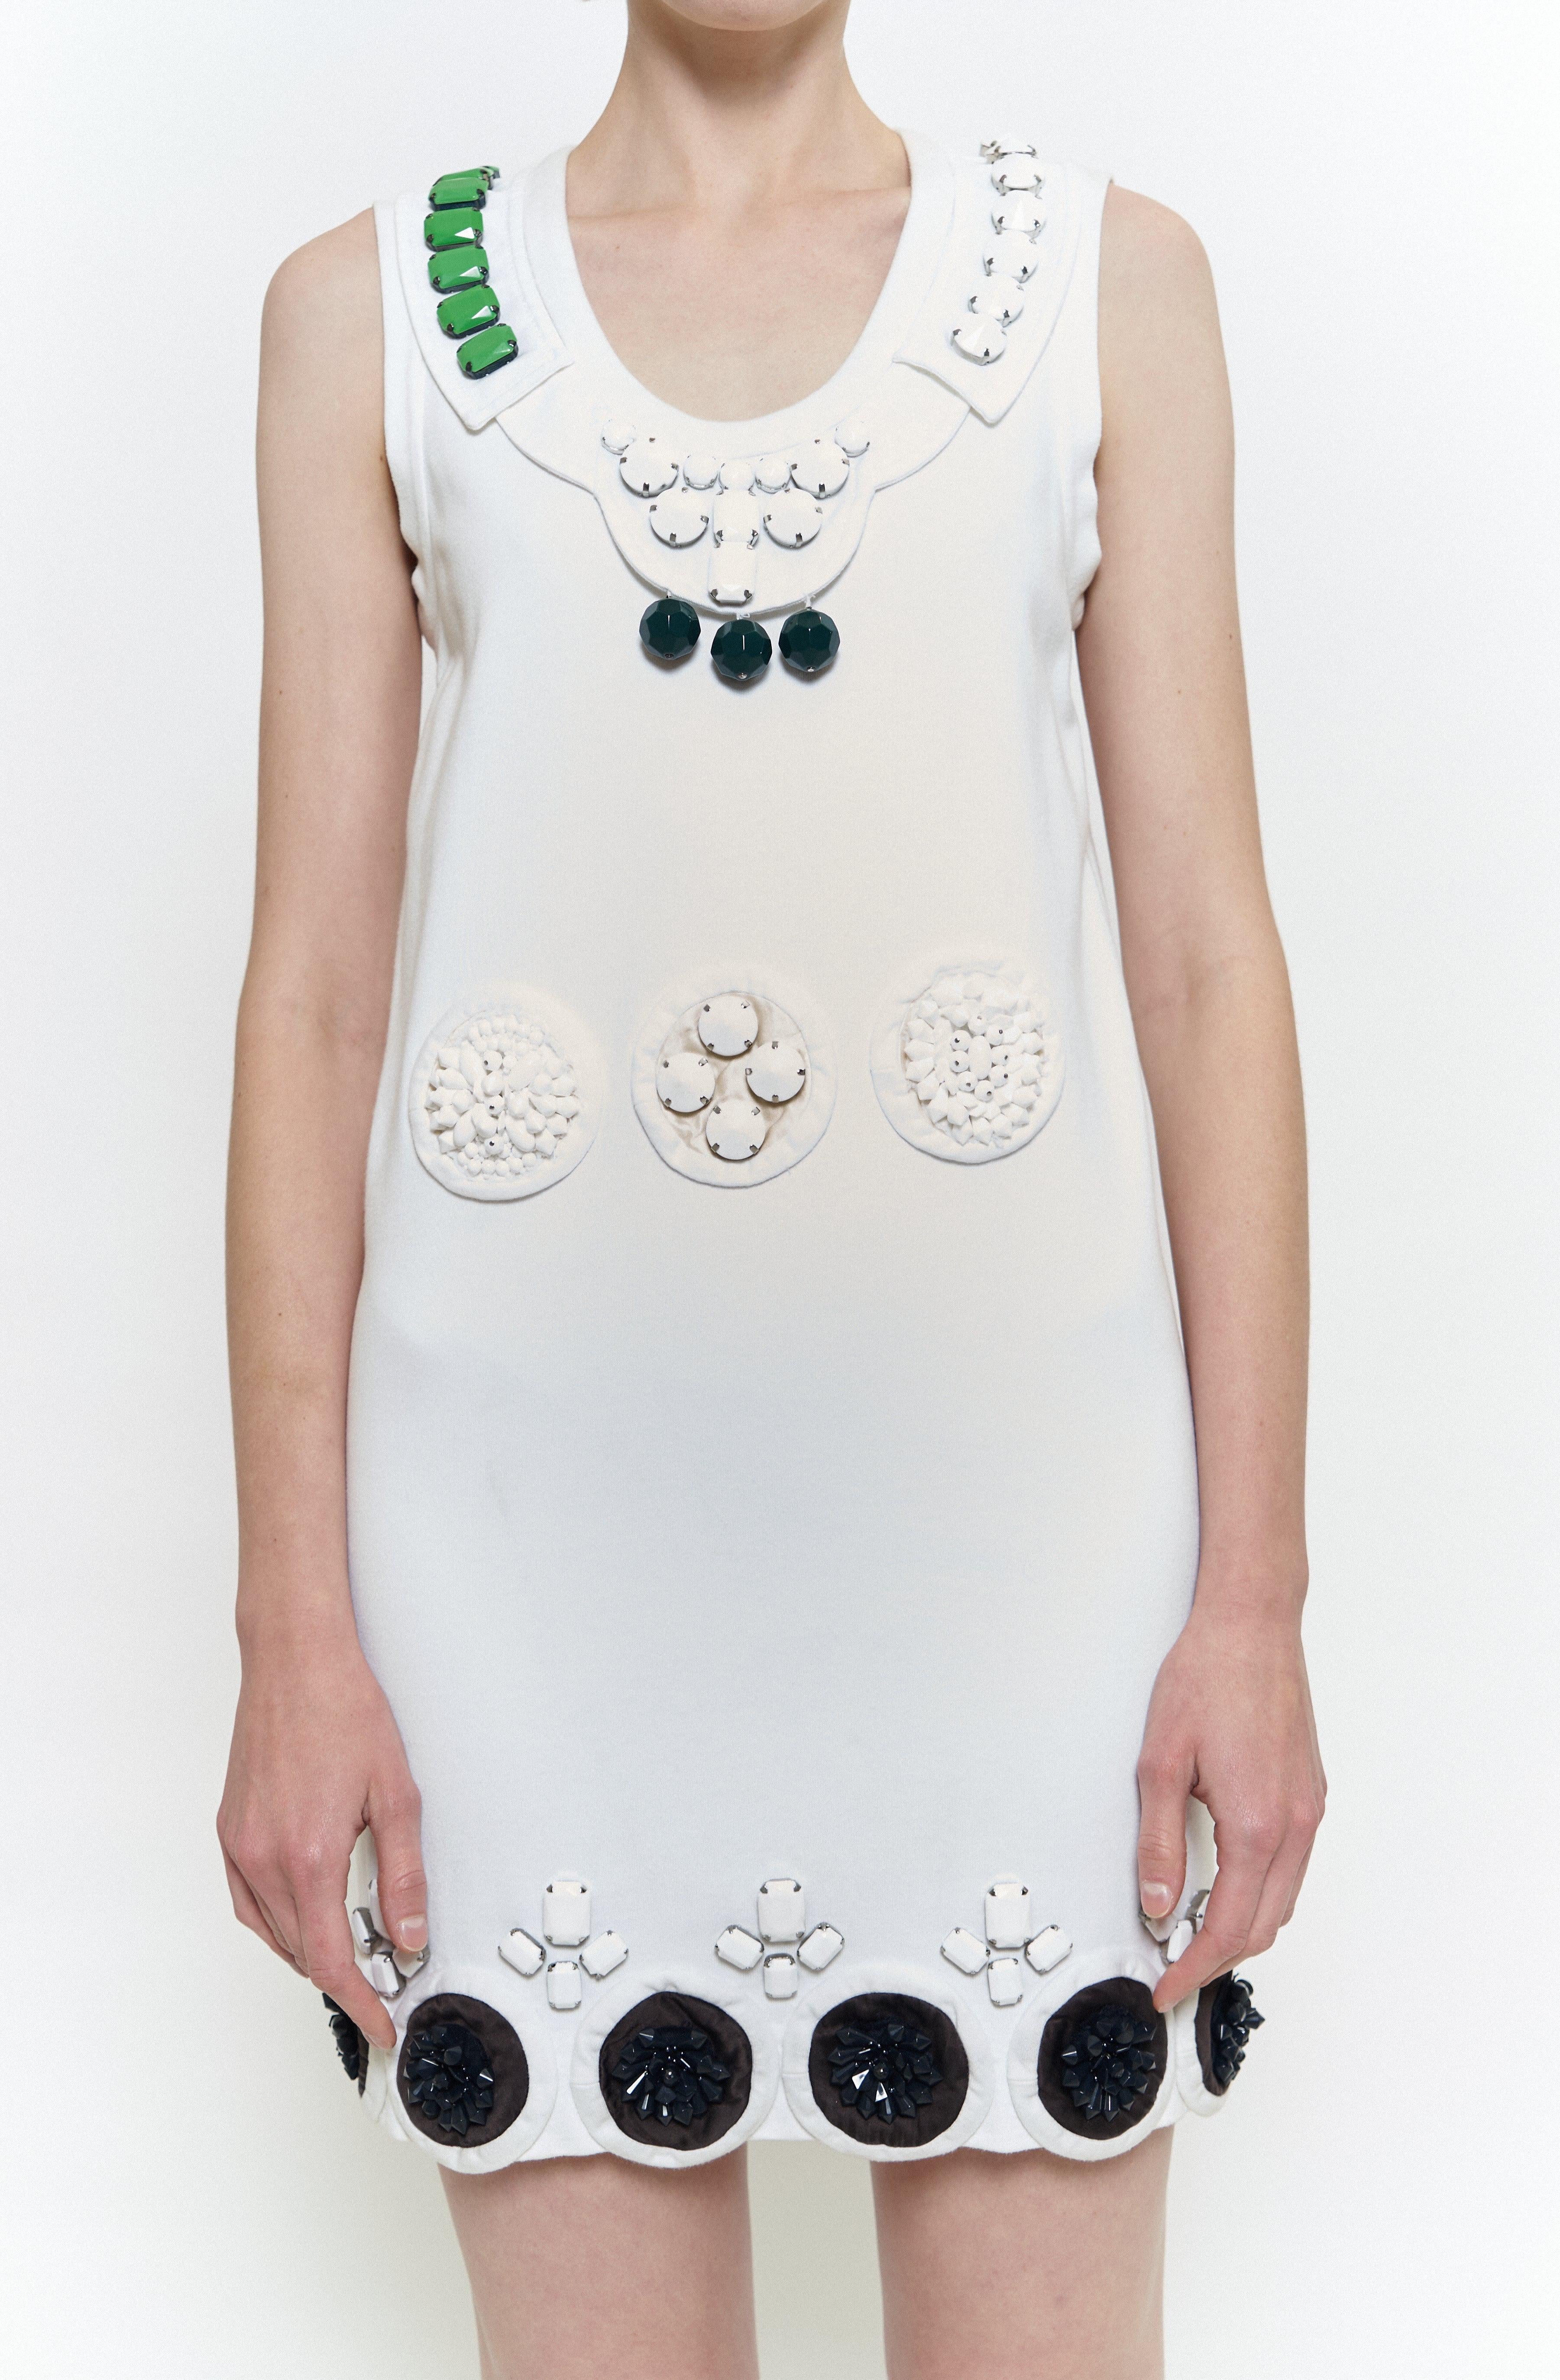 Prada S/S 2003 Runway Campaign Beaded Shift Dress In Excellent Condition For Sale In BELLEVUE HILL, NSW